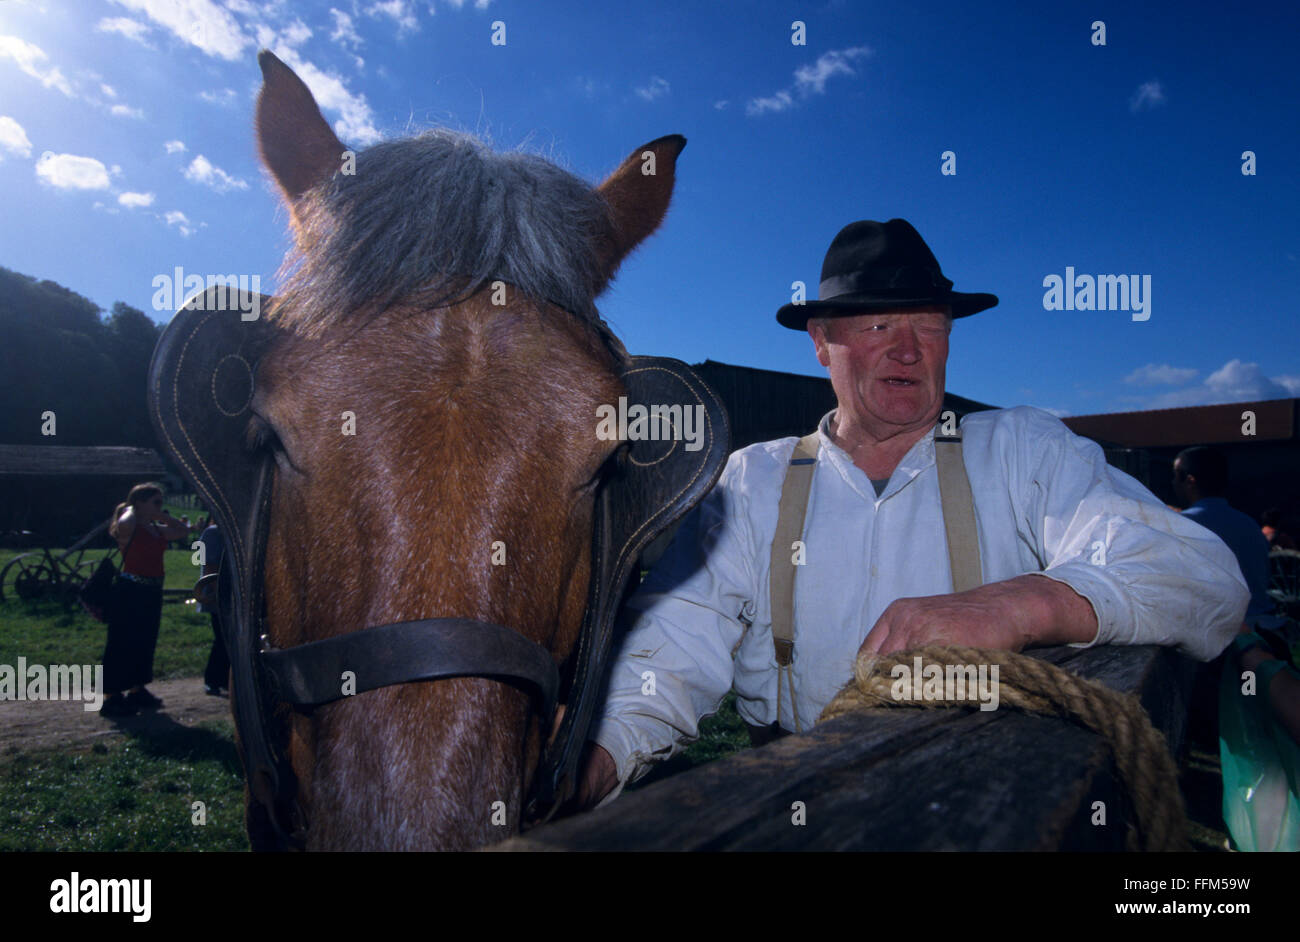 France, Meuse (55), Azannes, old craft village, old farmer with his horse // Meuse (55), Azannes, village des vieux metiers, fer Stock Photo